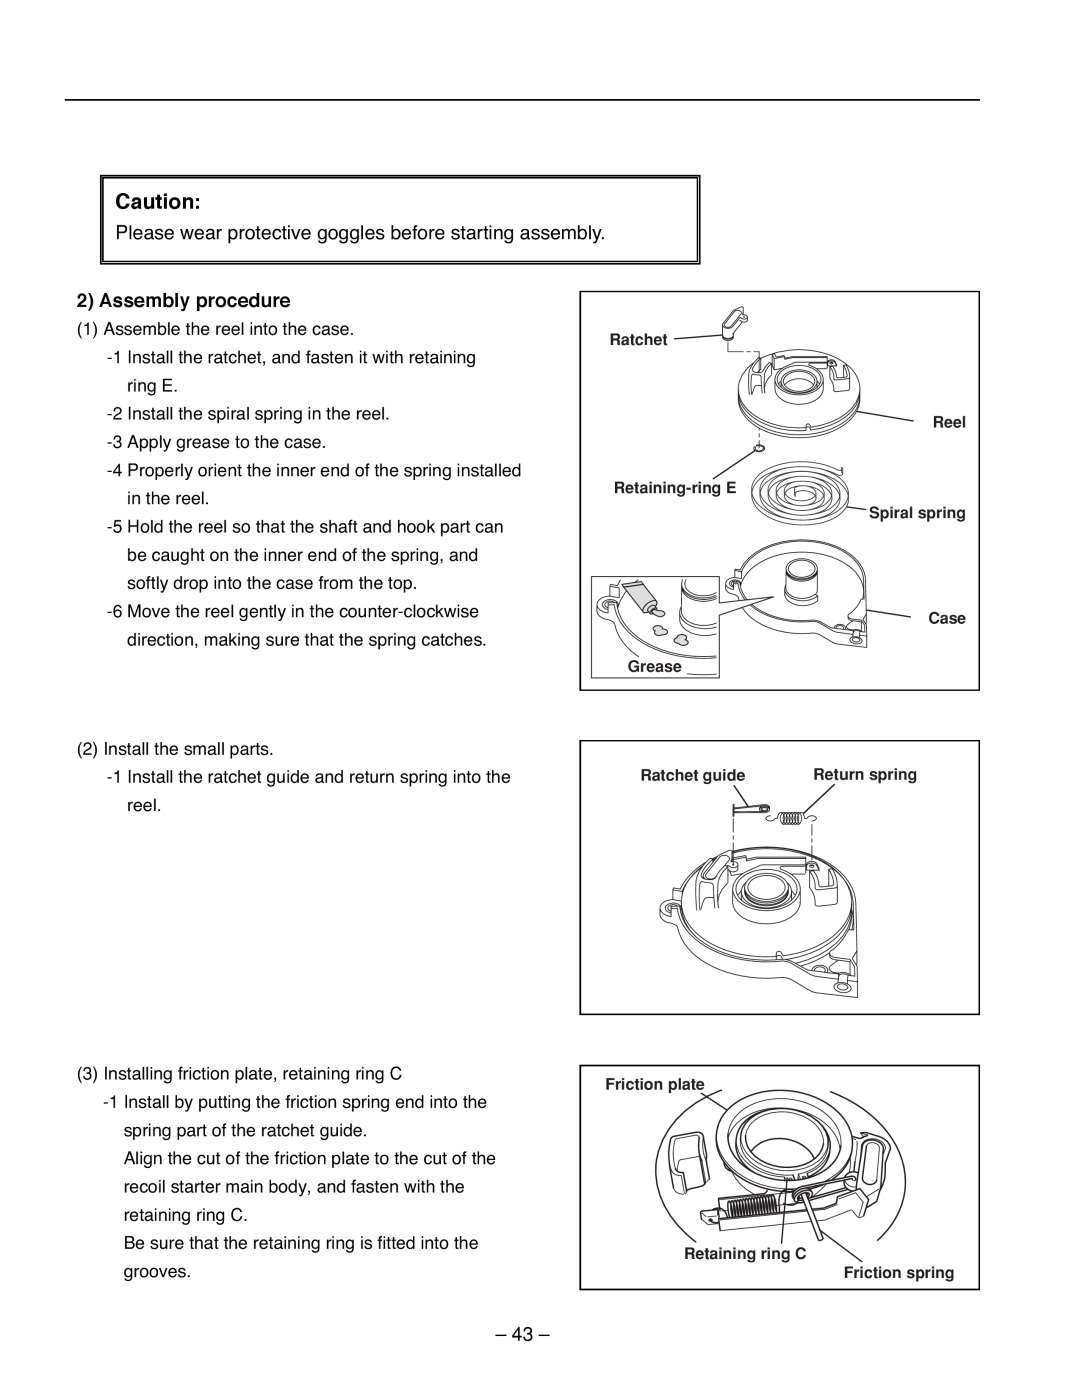 Subaru R1100 service manual Please wear protective goggles before starting assembly, Assembly procedure 